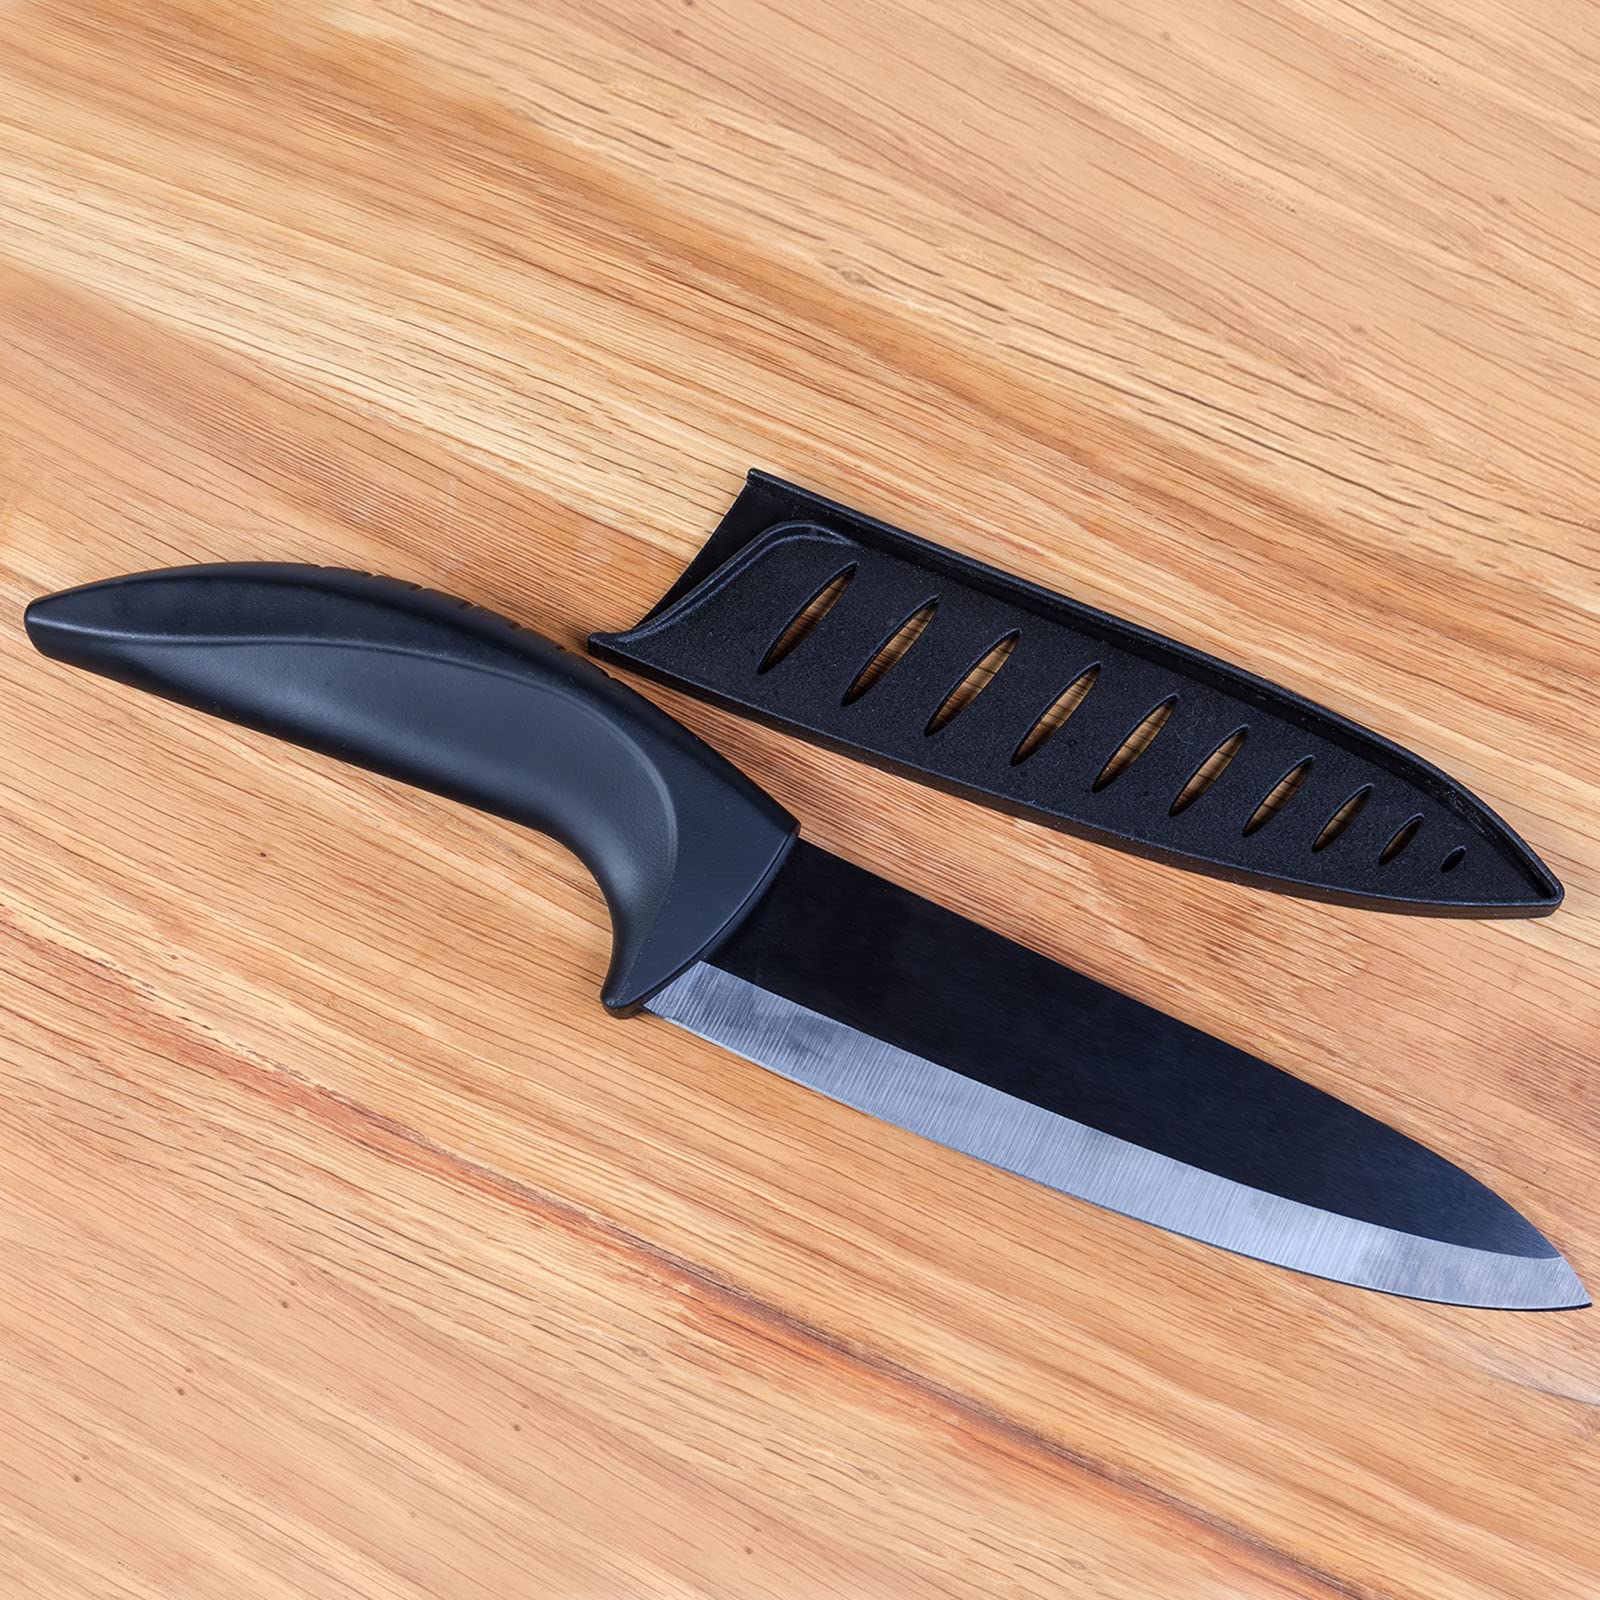 PATIKIL Plastic Safety Knife Cover Sleeves for 3.5" Paring Knife, 2 Pack Knives Edge Guard Blade Protector Universal Knife Sheath for Kitchen, Black